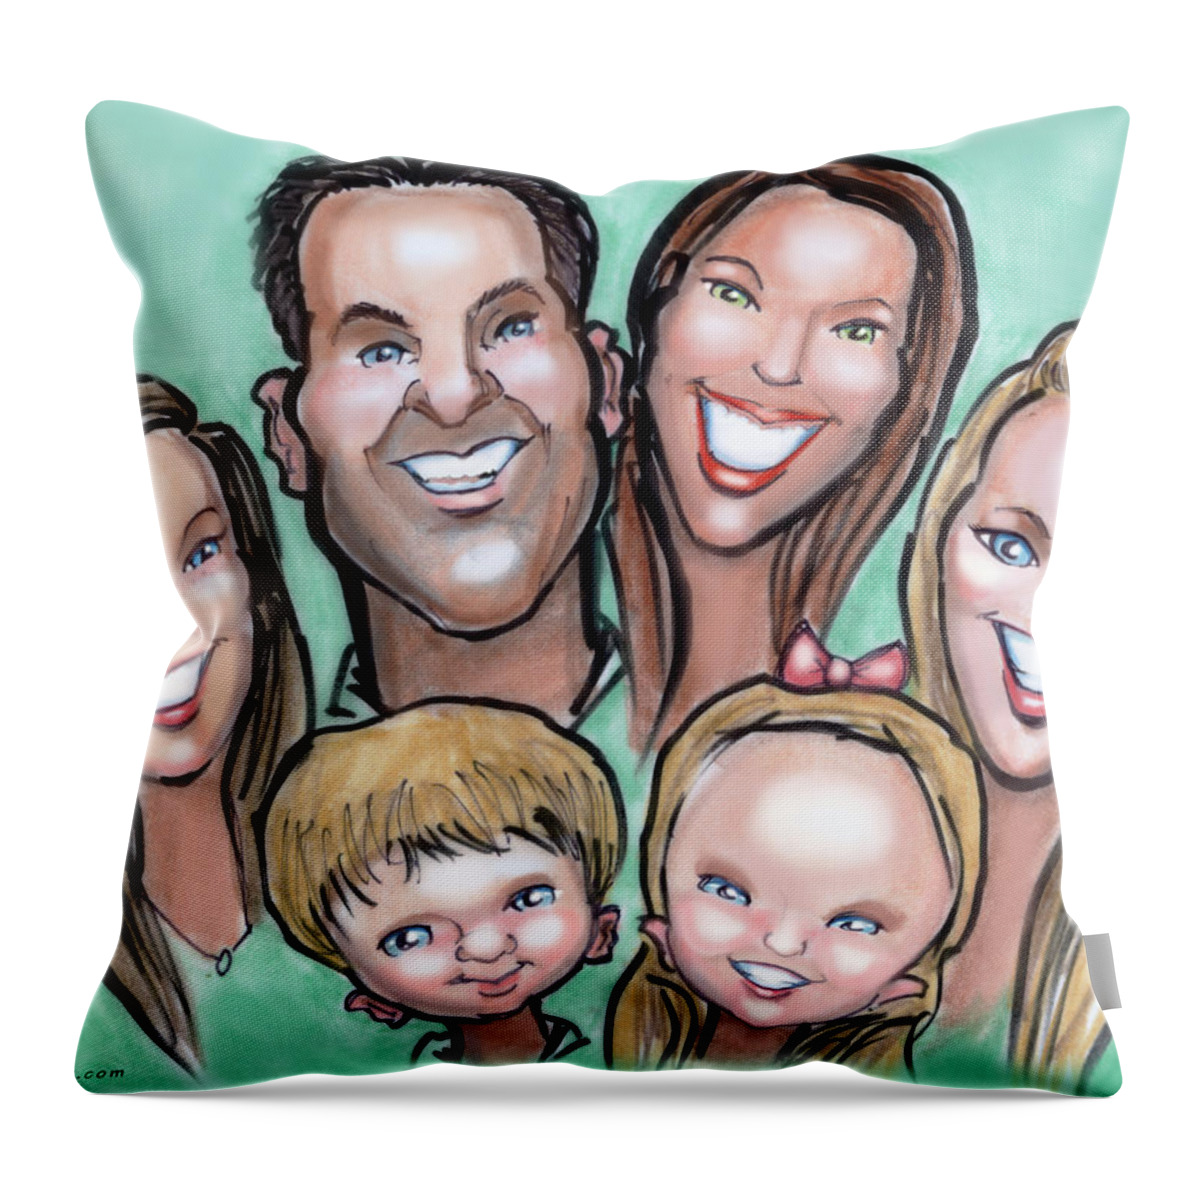  Throw Pillow featuring the digital art Group Caricature #2 by Kevin Middleton